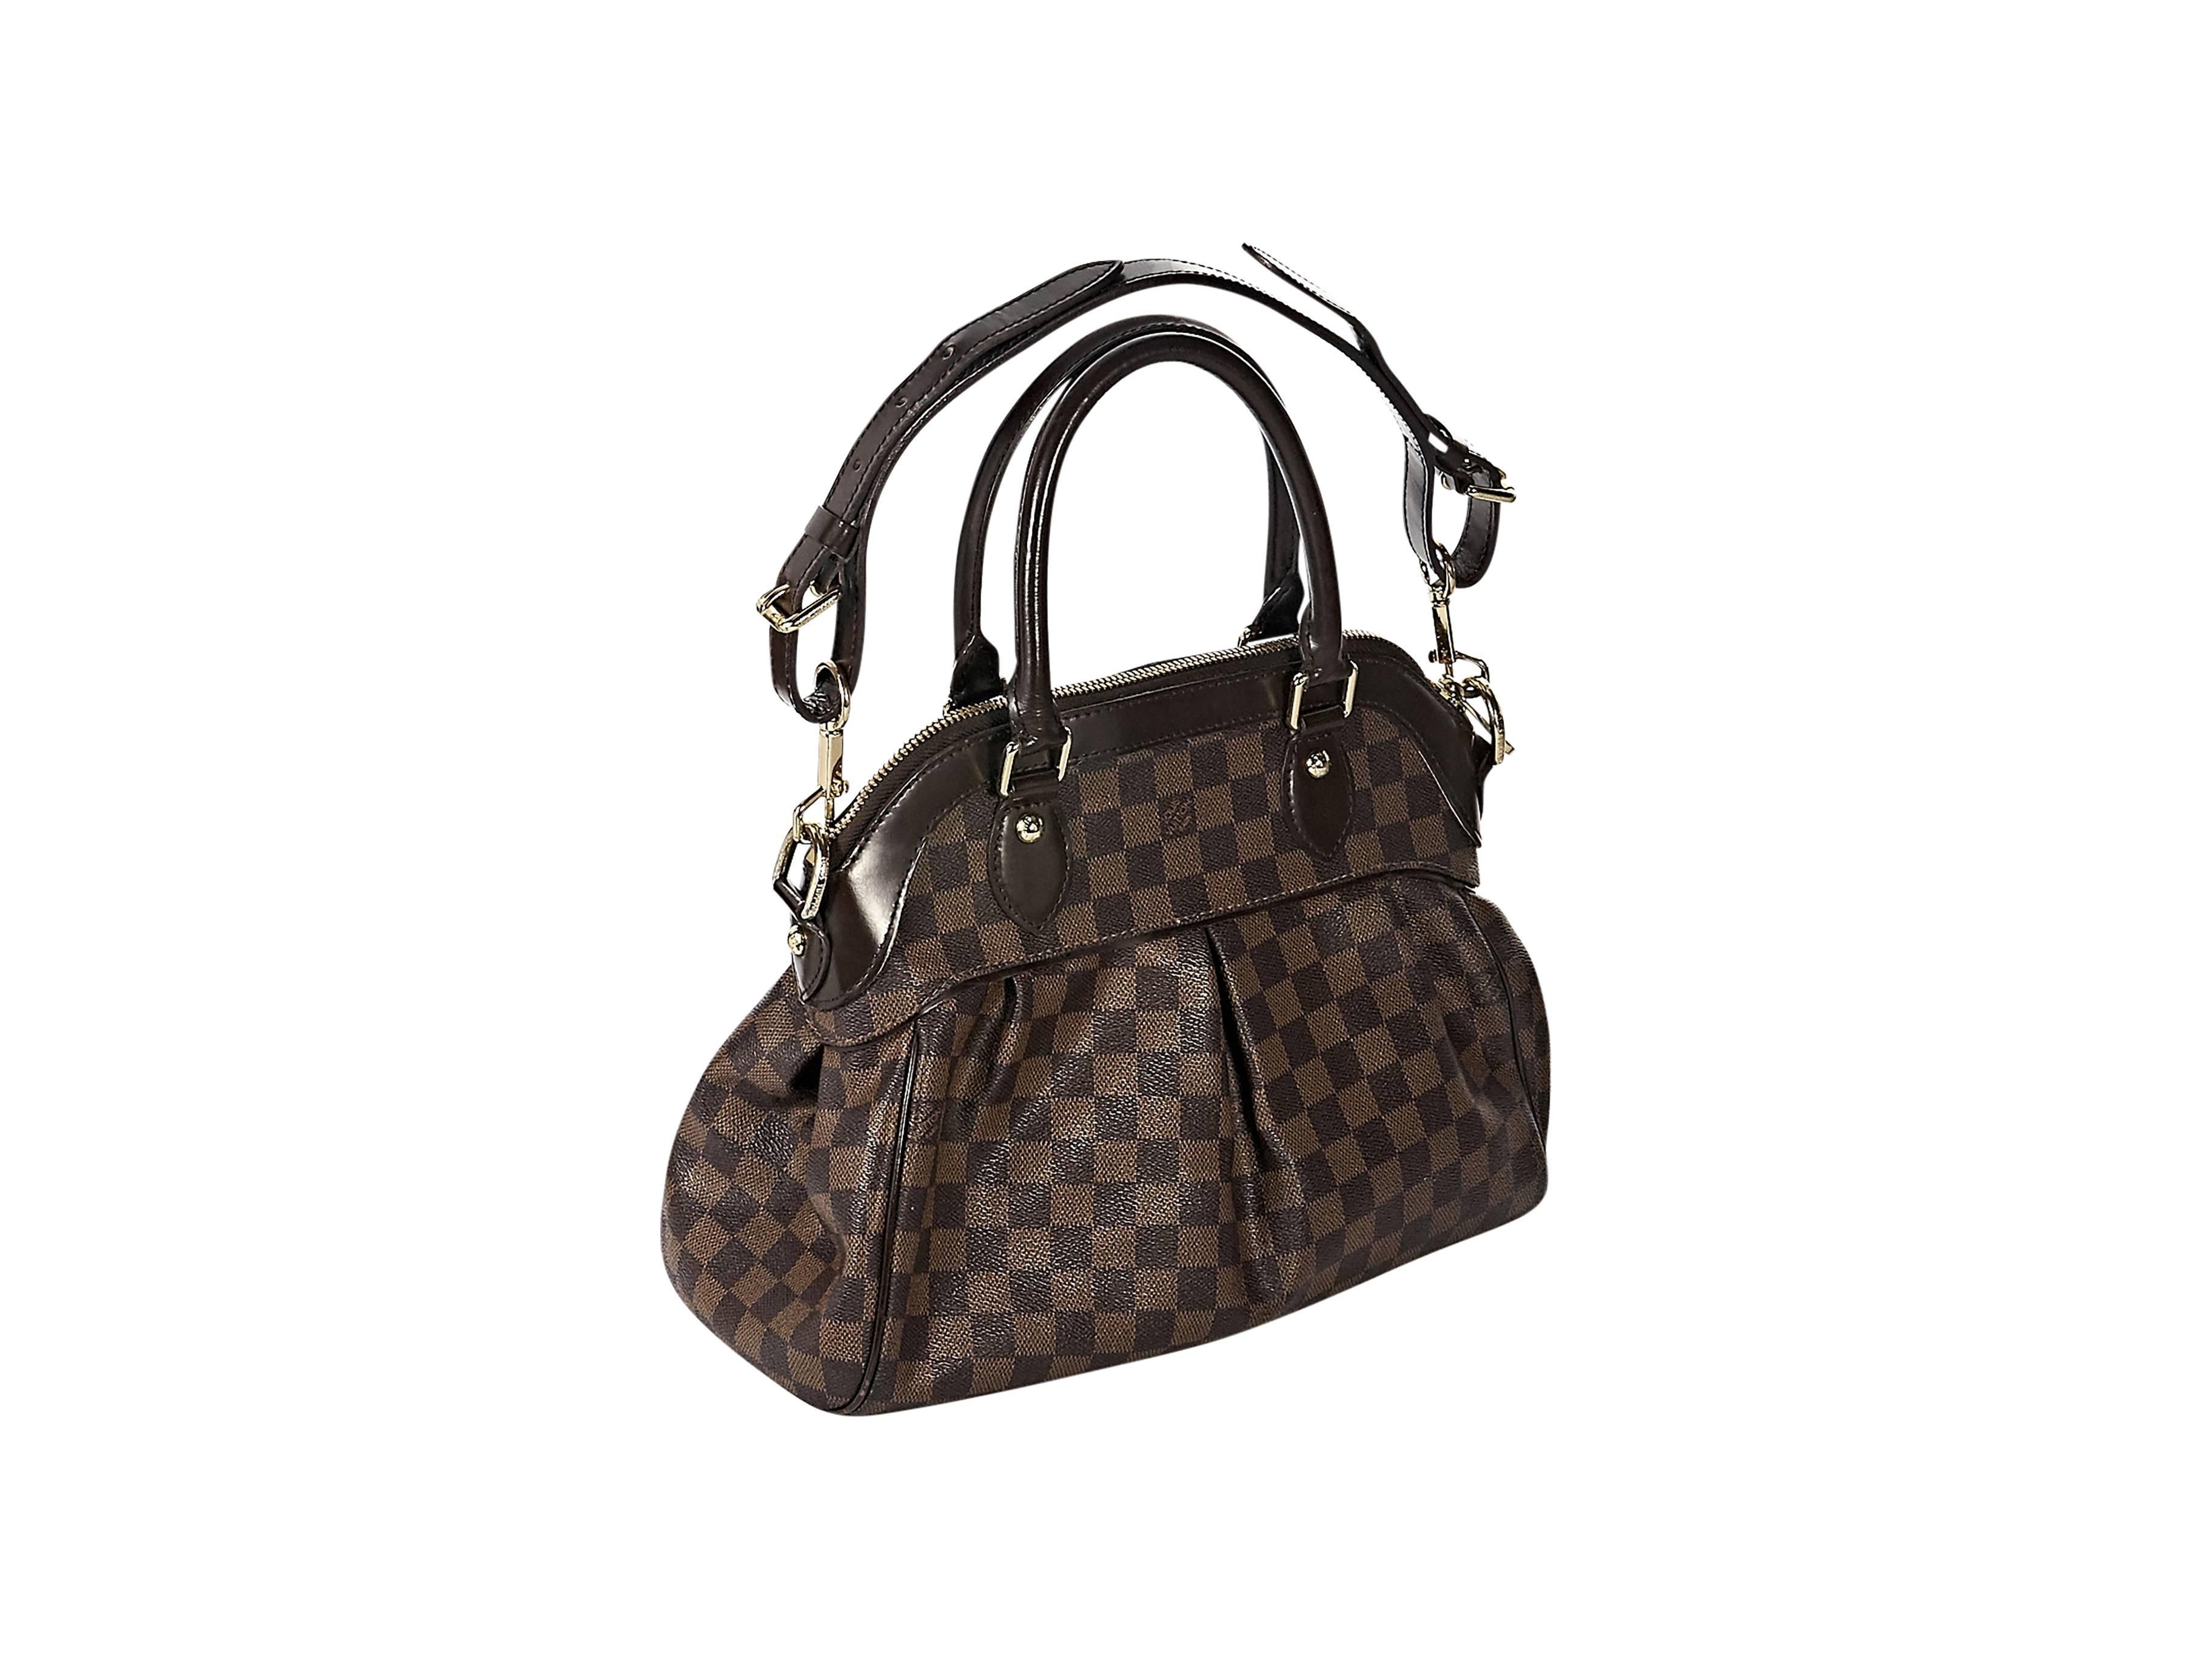 Product details: Brown damier ebene canvas Trevi PM satchel by Louis Vuitton. Dual top carry handles. Removable, adjustable shoulder strap. Top zip closure. Lined interior with inner pockets. Protective metal feet. Goldtone hardware. 
Condition: